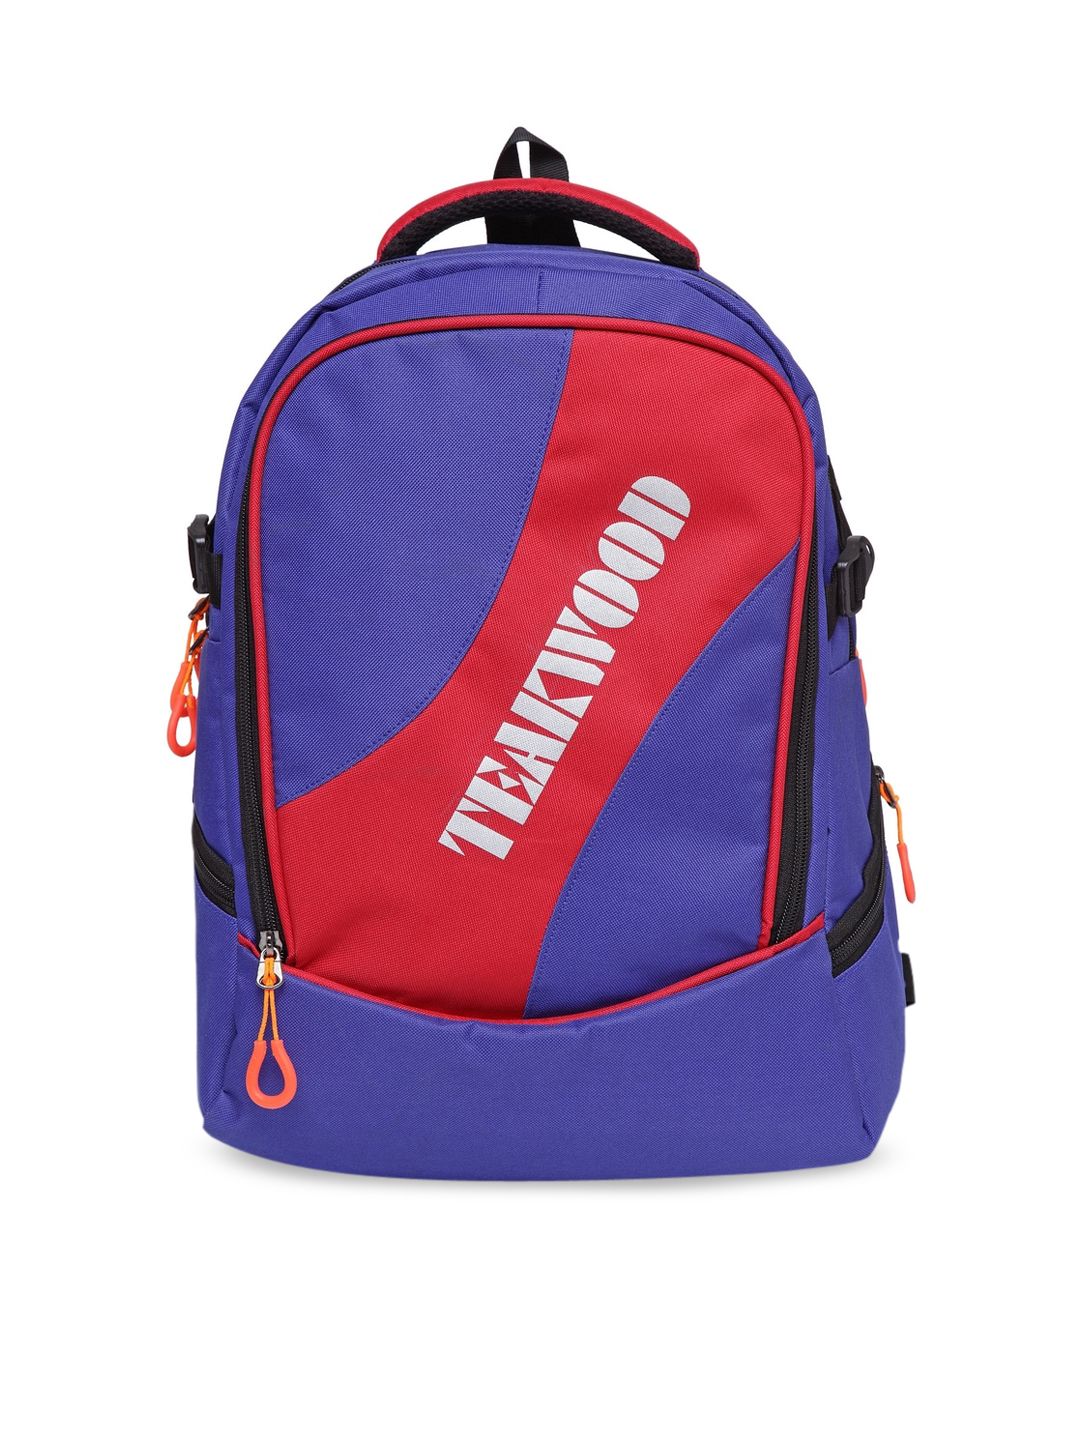 Teakwood Leathers Unisex Violet & Red Colourblocked Backpack Price in India